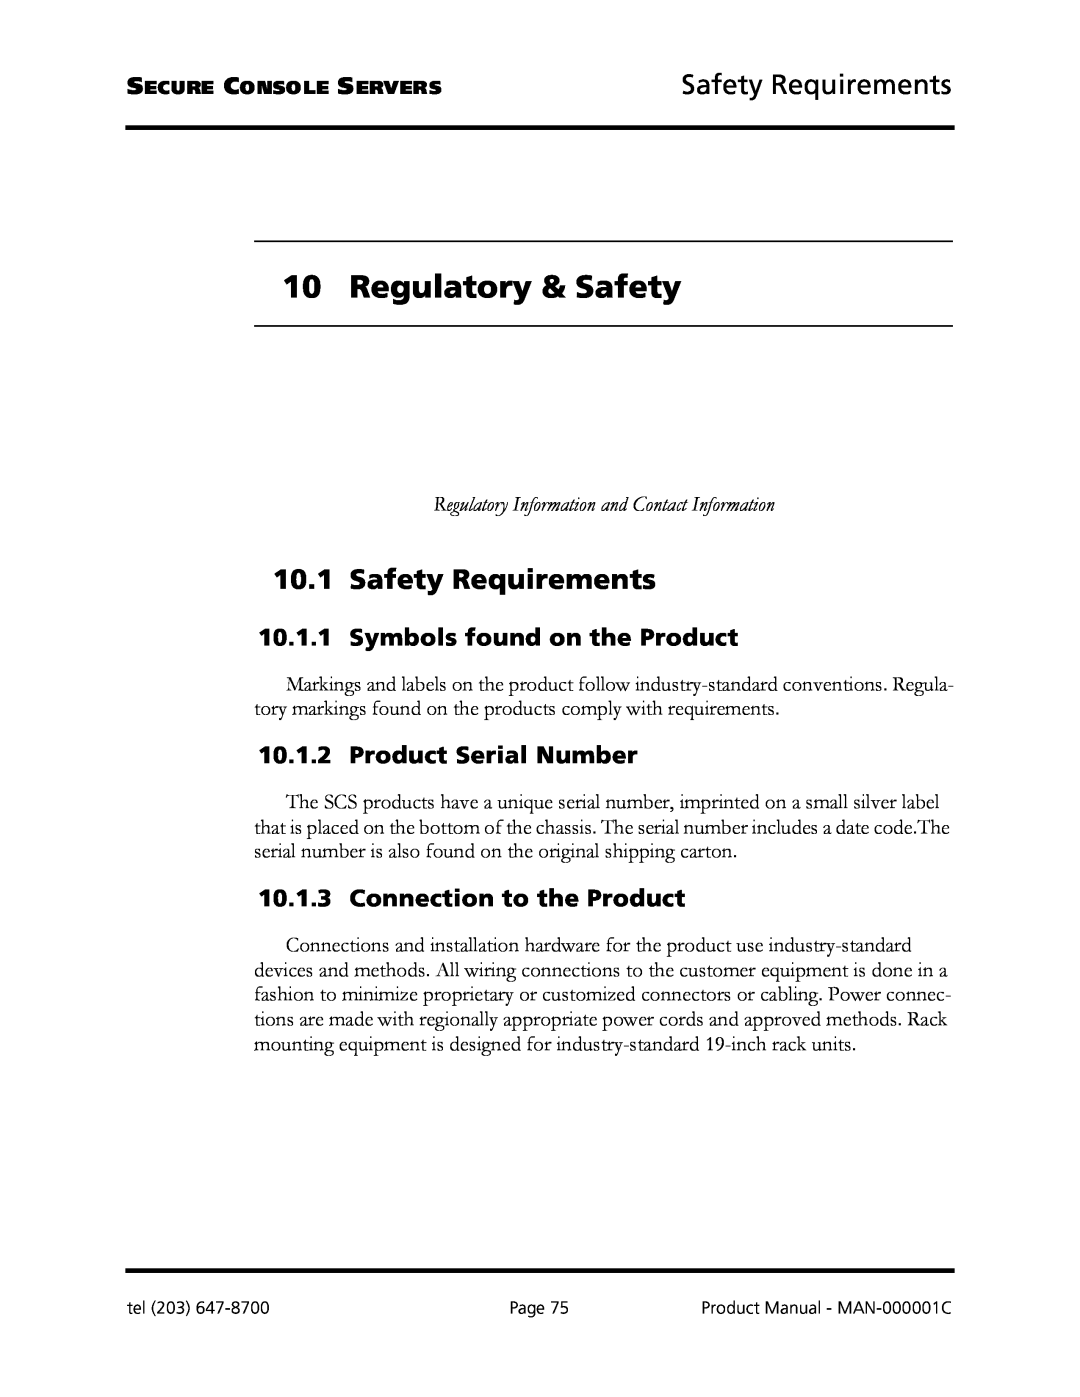 Logical Solutions SCS-R Regulatory & Safety, Safety Requirements, Symbols found on the Product, Product Serial Number 